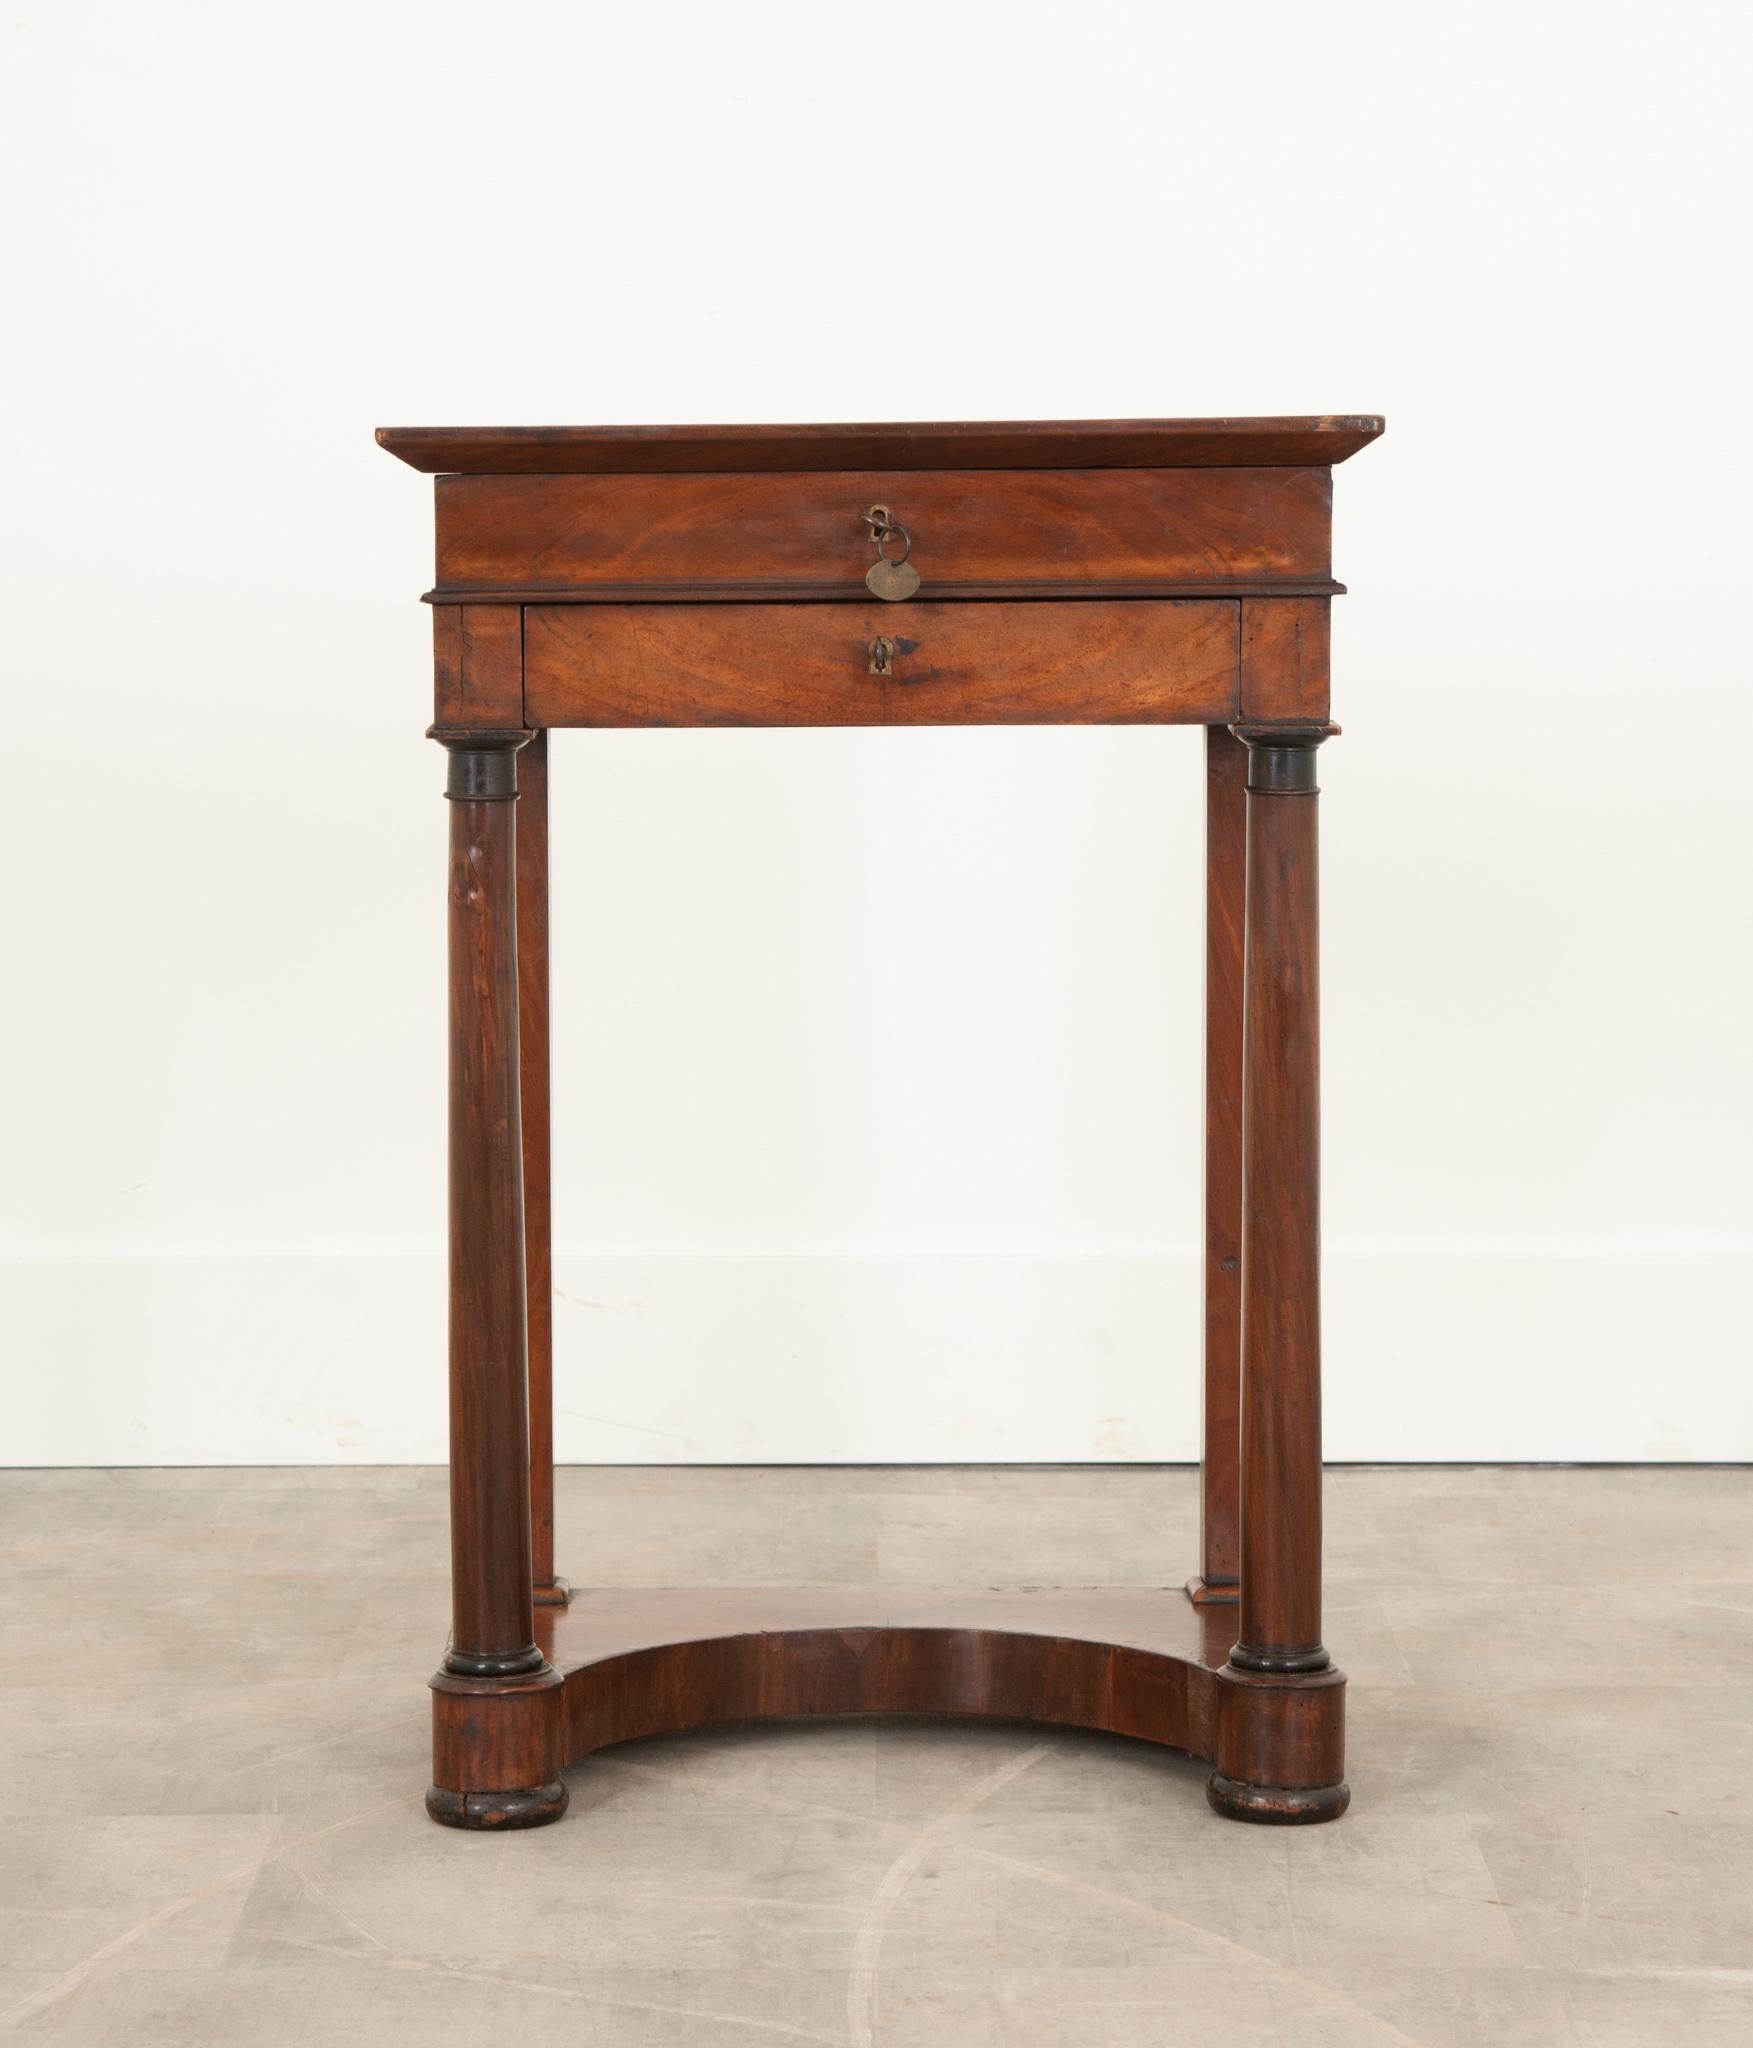 This petite work table from 19th century France is full of charming elements within a compact design. Details allude to this piece serving as a correspondence and sewing table. Unlocking what seems to be a drawer actually allows the top to hinge